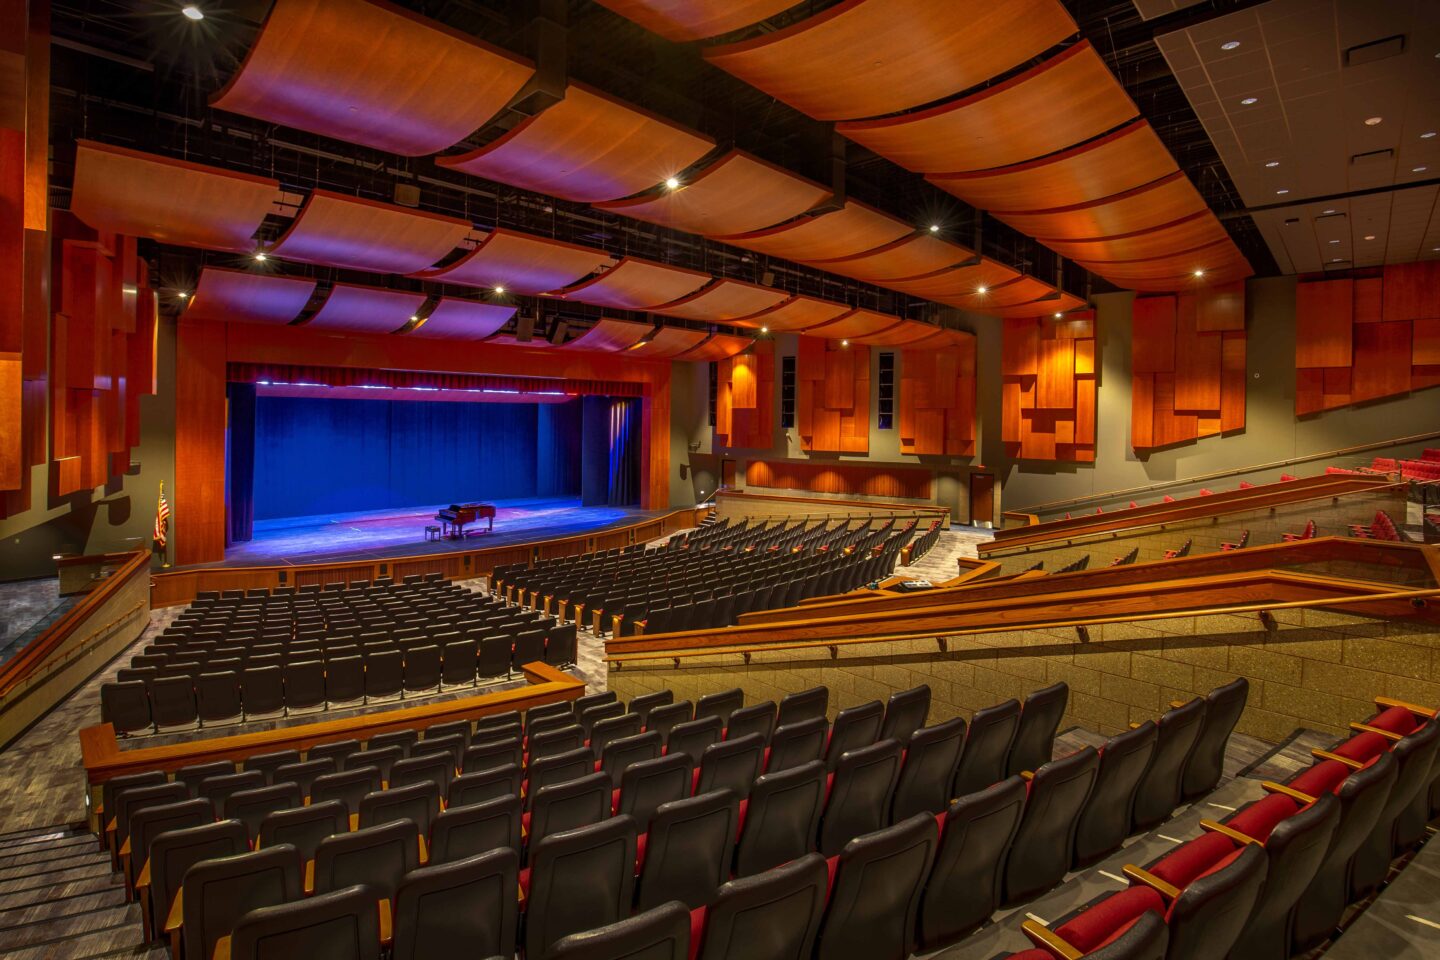 This view of the renovated auditorium stage and seating also showcases the elegant wood-toned acoustic ceiling and wall panels